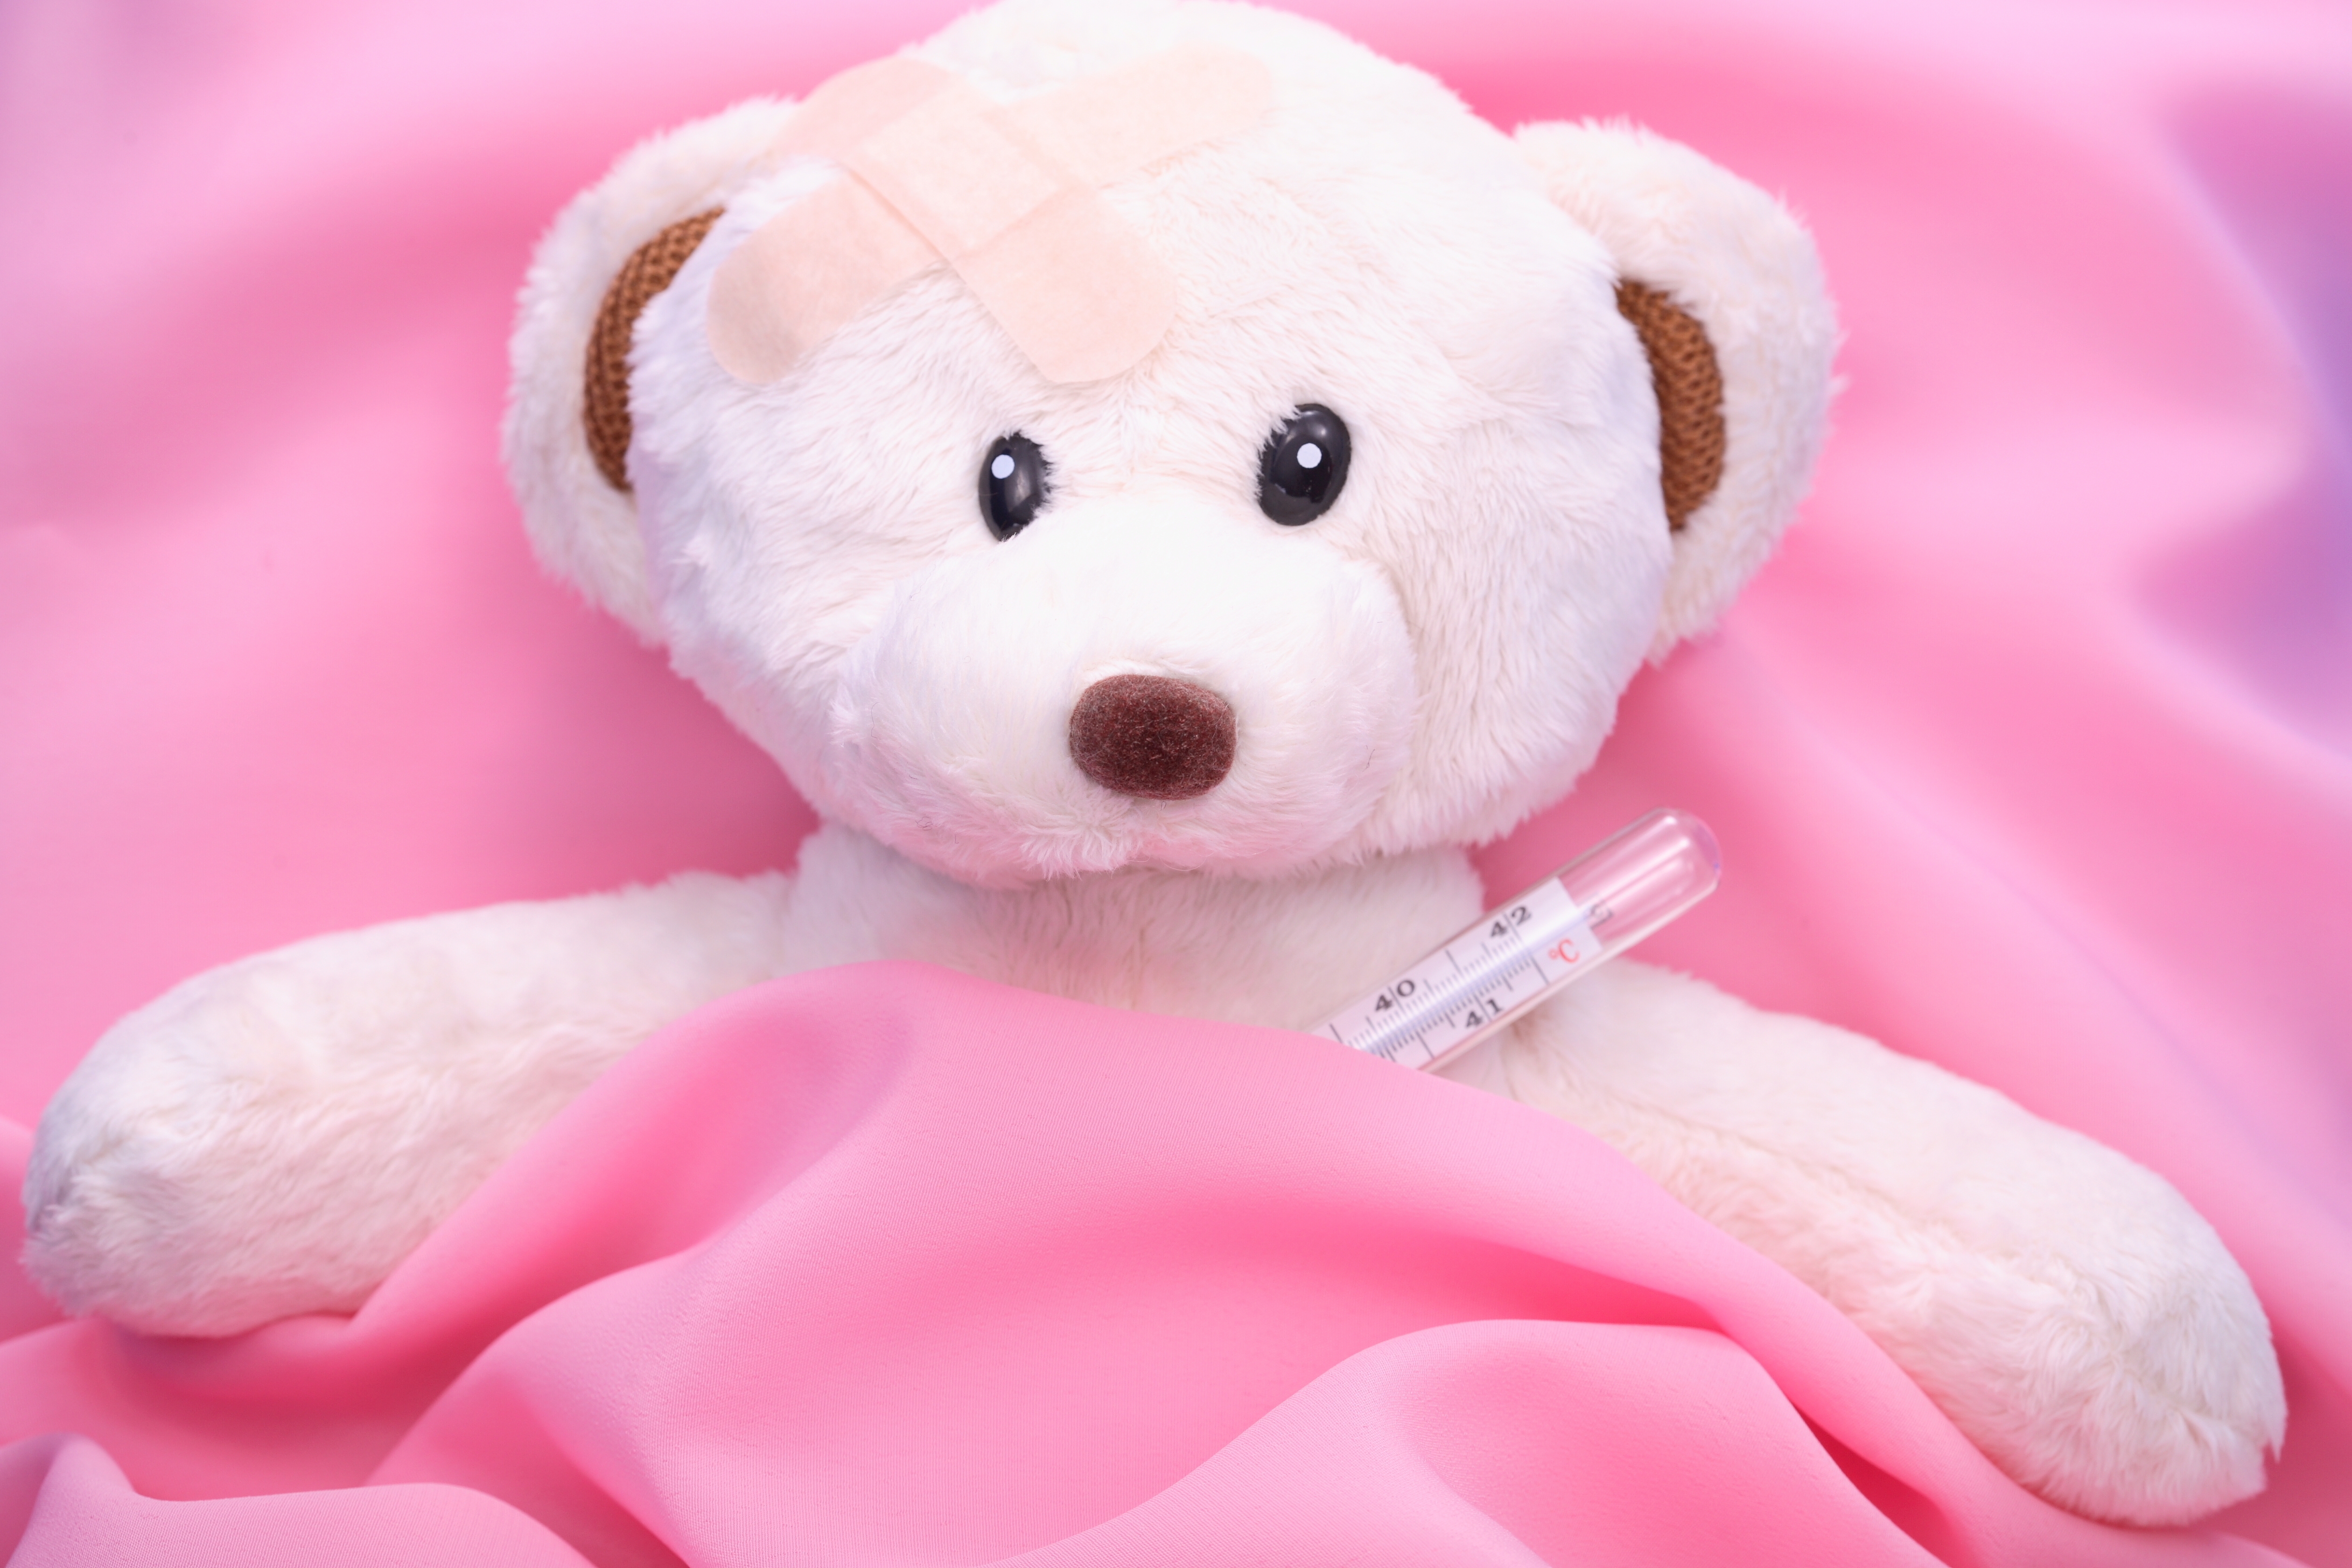 teddy bear, miscellanea, miscellaneous, toy, bed, disease, illness, plaster, patch, thermometer